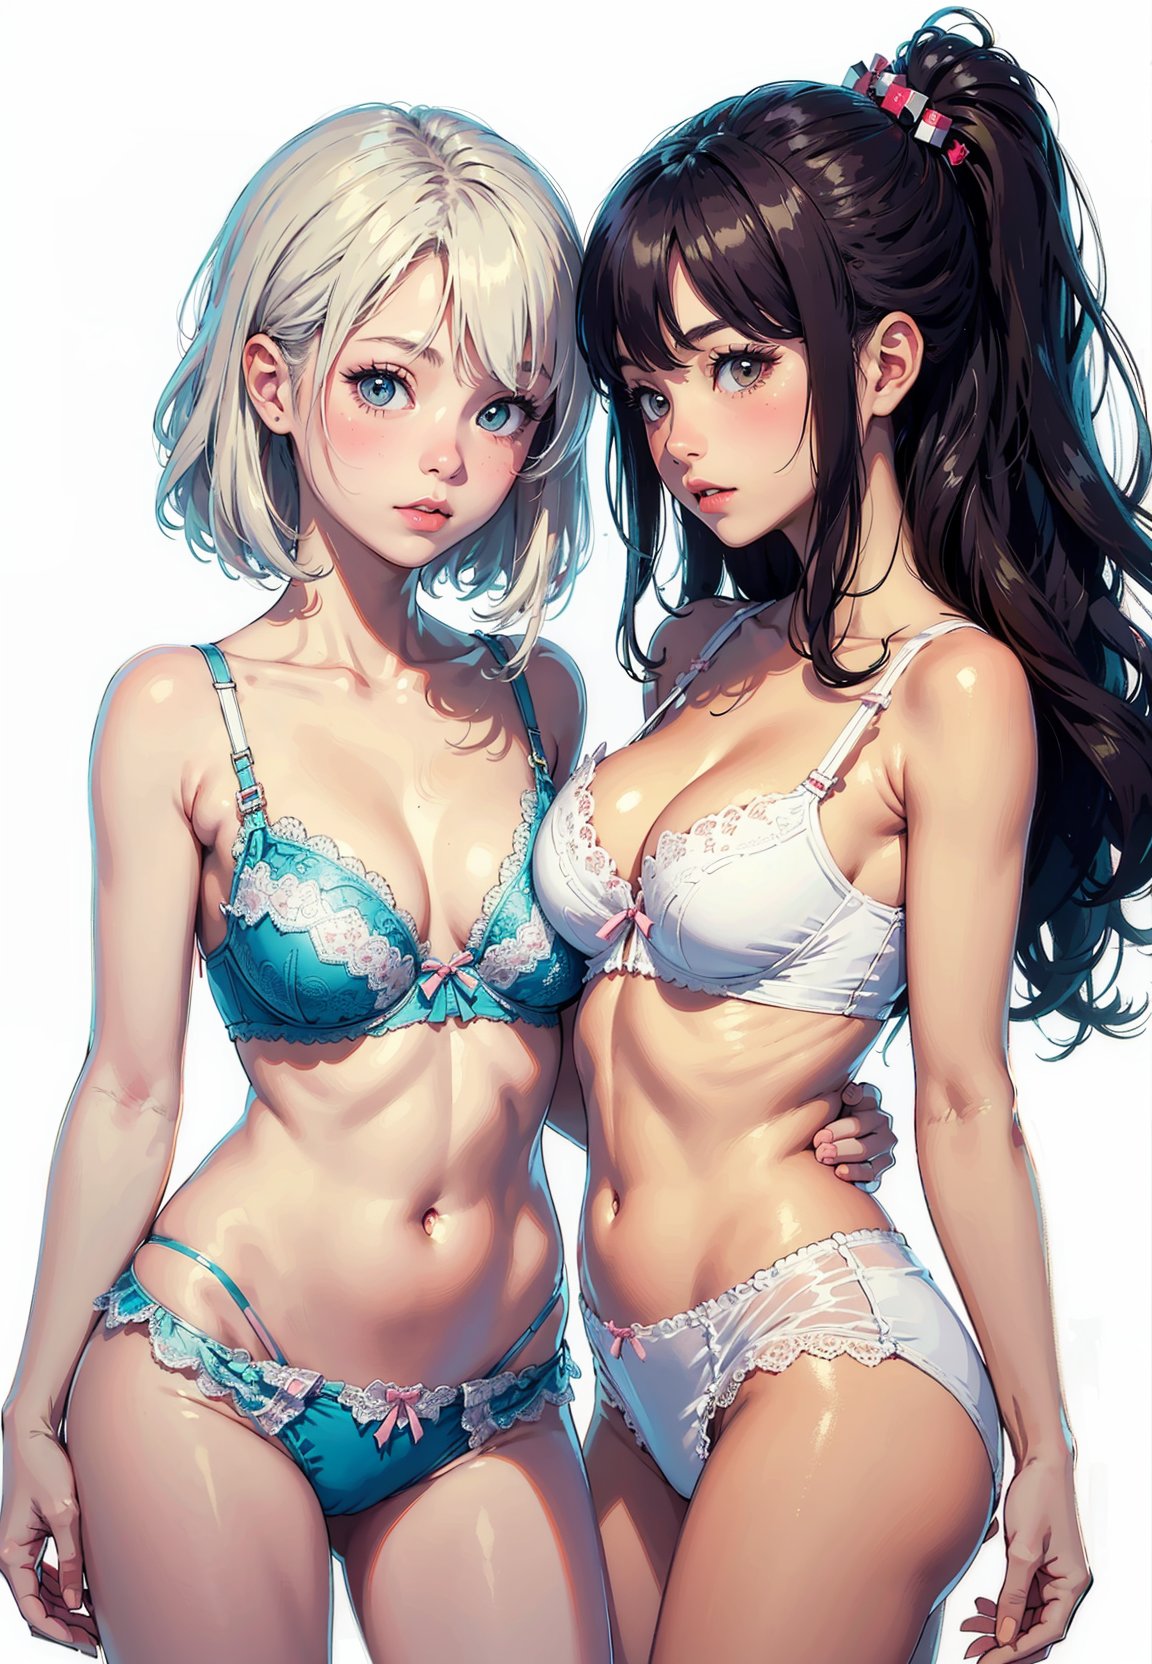 (finely best quality illustration:1.2), (kawaii girl:1.1), 2girls, multiple girls, Craftsman made contour, coquettish skin, (white background:1.25), (soft smile:0.7), eyes-to-eyes, face-to-face, bare legs, nose blush, Craftsman made bra, Craftsman made panties, breasts to breasts, navel